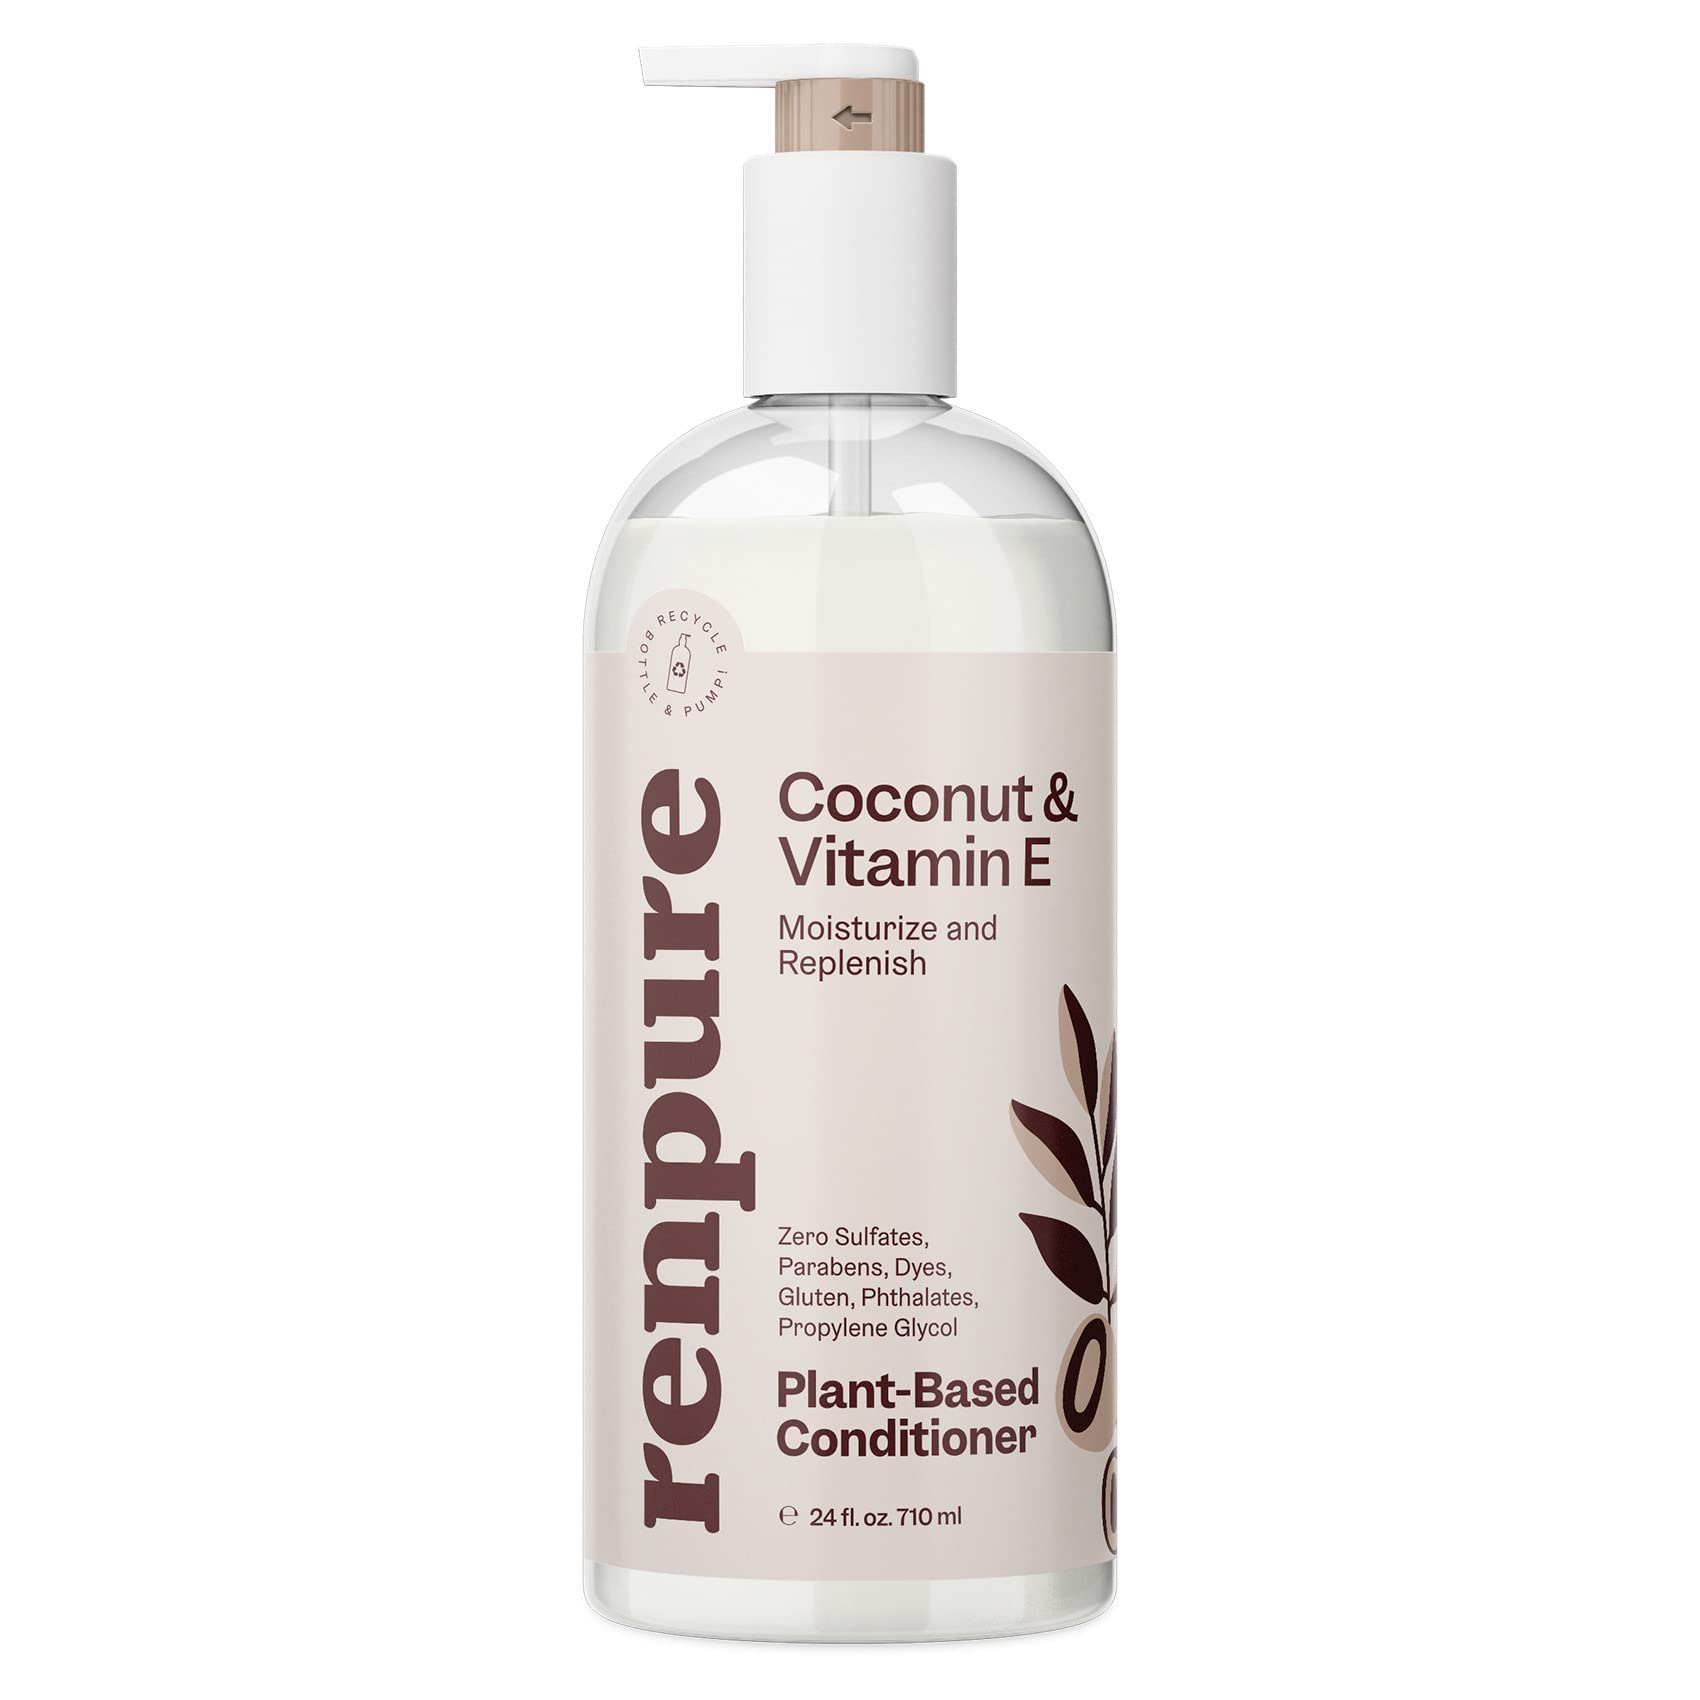 Renpure Plant Based Coconut and Vitamin E Moisturize and Replenish Conditioner - Ideal for Dry, Lifeless Hair - Leaves Hair Silky and Smooth - Paraben Free - Recyclable, Pump Bottle Design - 24 fl oz